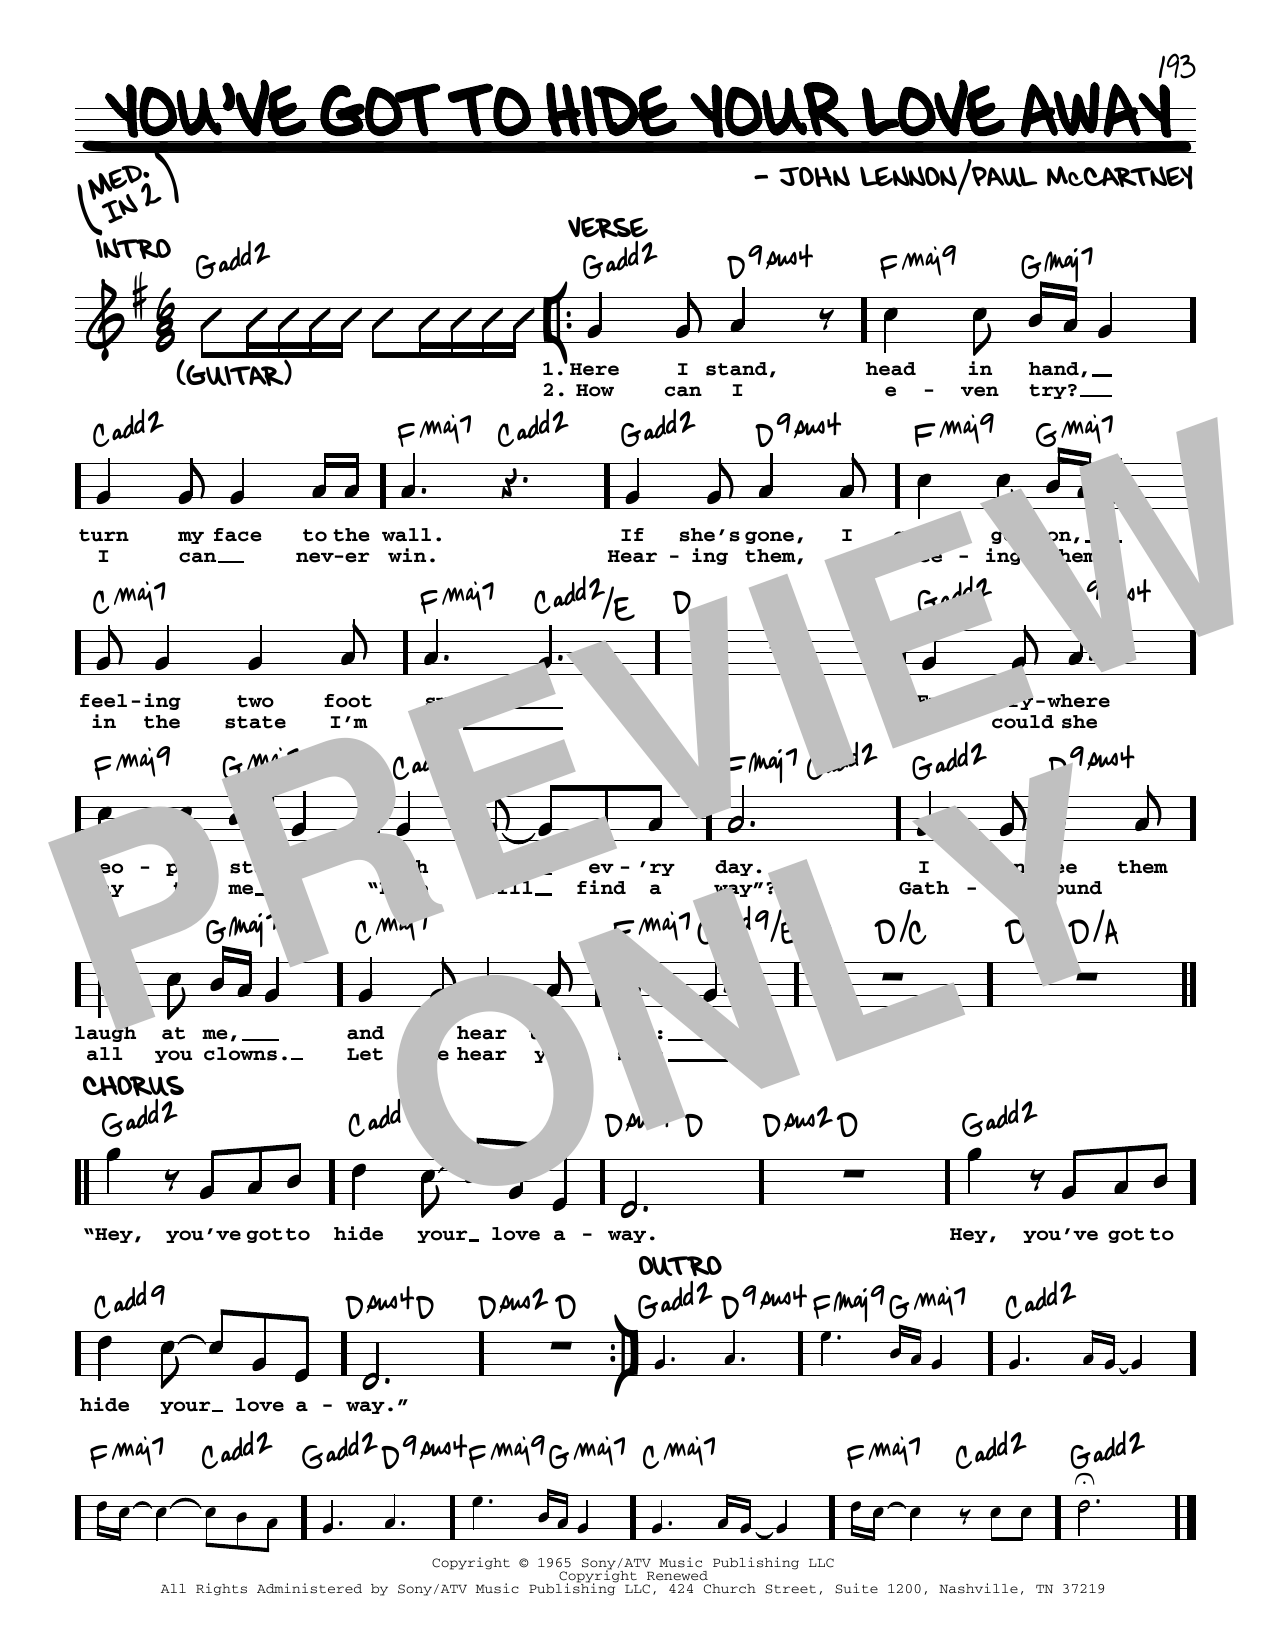 Download The Beatles You've Got To Hide Your Love Away [Jazz Sheet Music